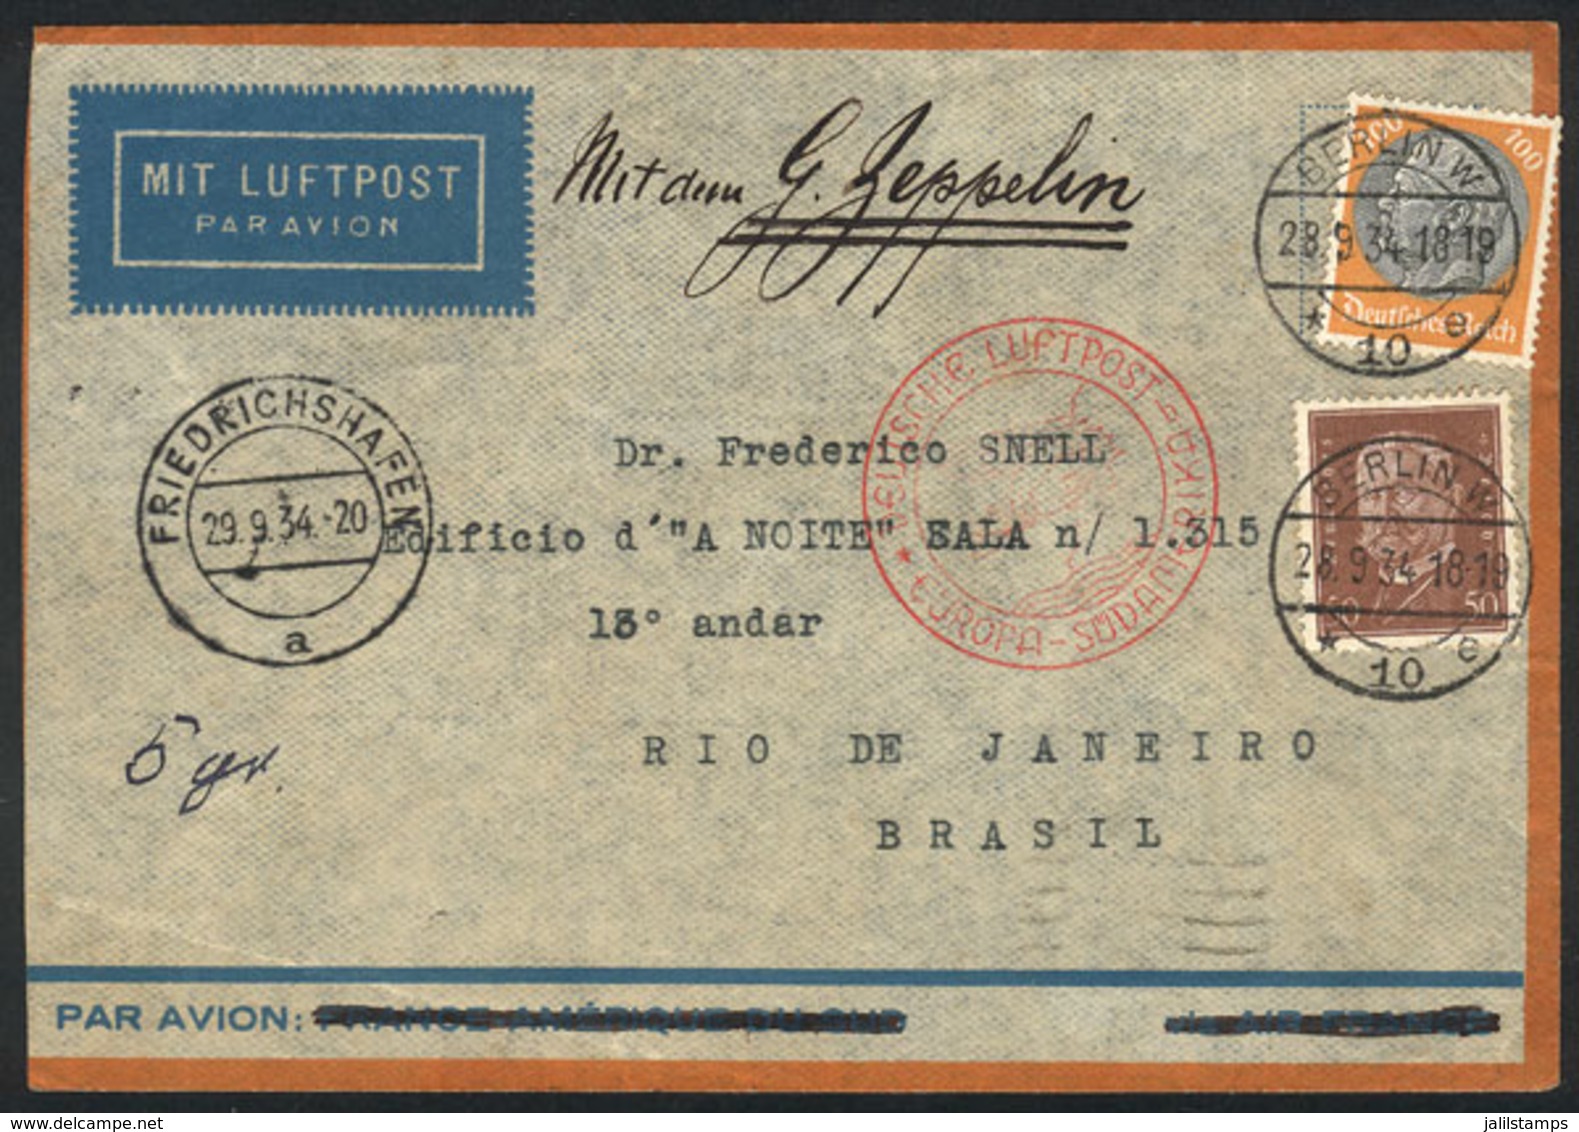 GERMANY: Cover Flown By ZEPPELIN, Sent From Berlin To Rio De Janeiro On 28/SE/1934, With Friedrichshafen Transit Mark Of - Briefe U. Dokumente